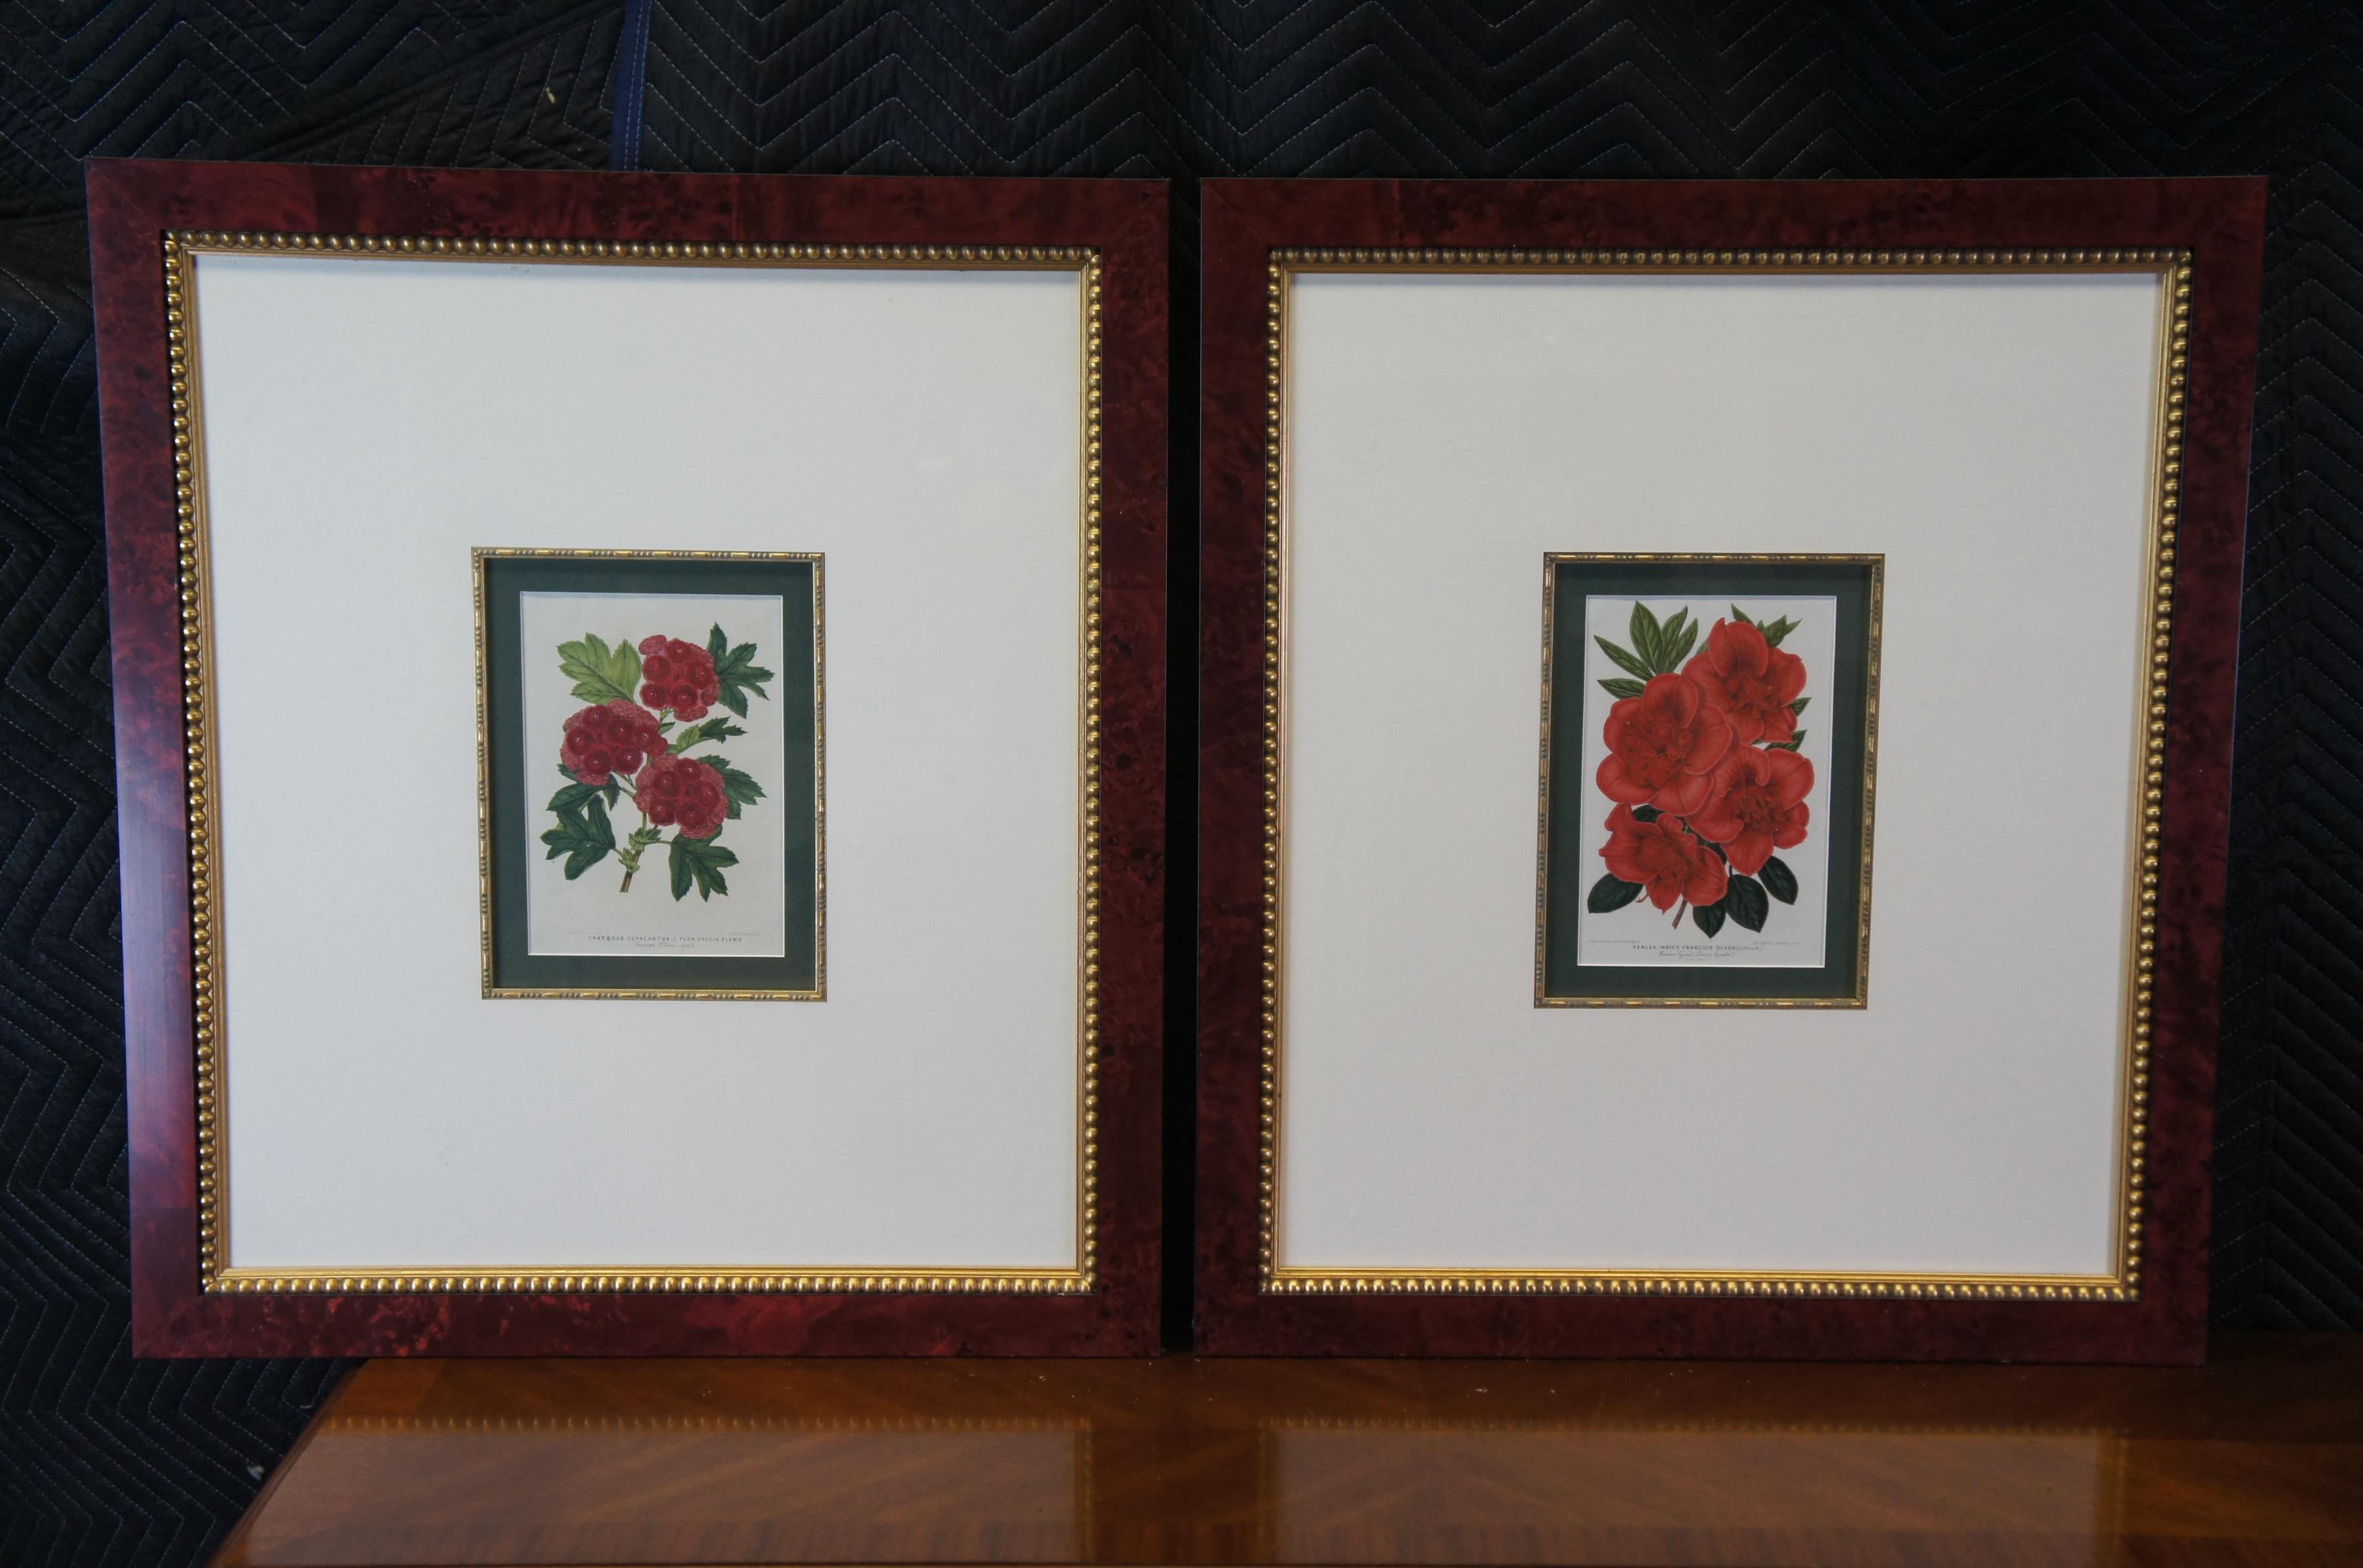 2 Horto Van Houtteano Framed Botanical Tropical Colored Lithograph Prints Plants For Sale 5